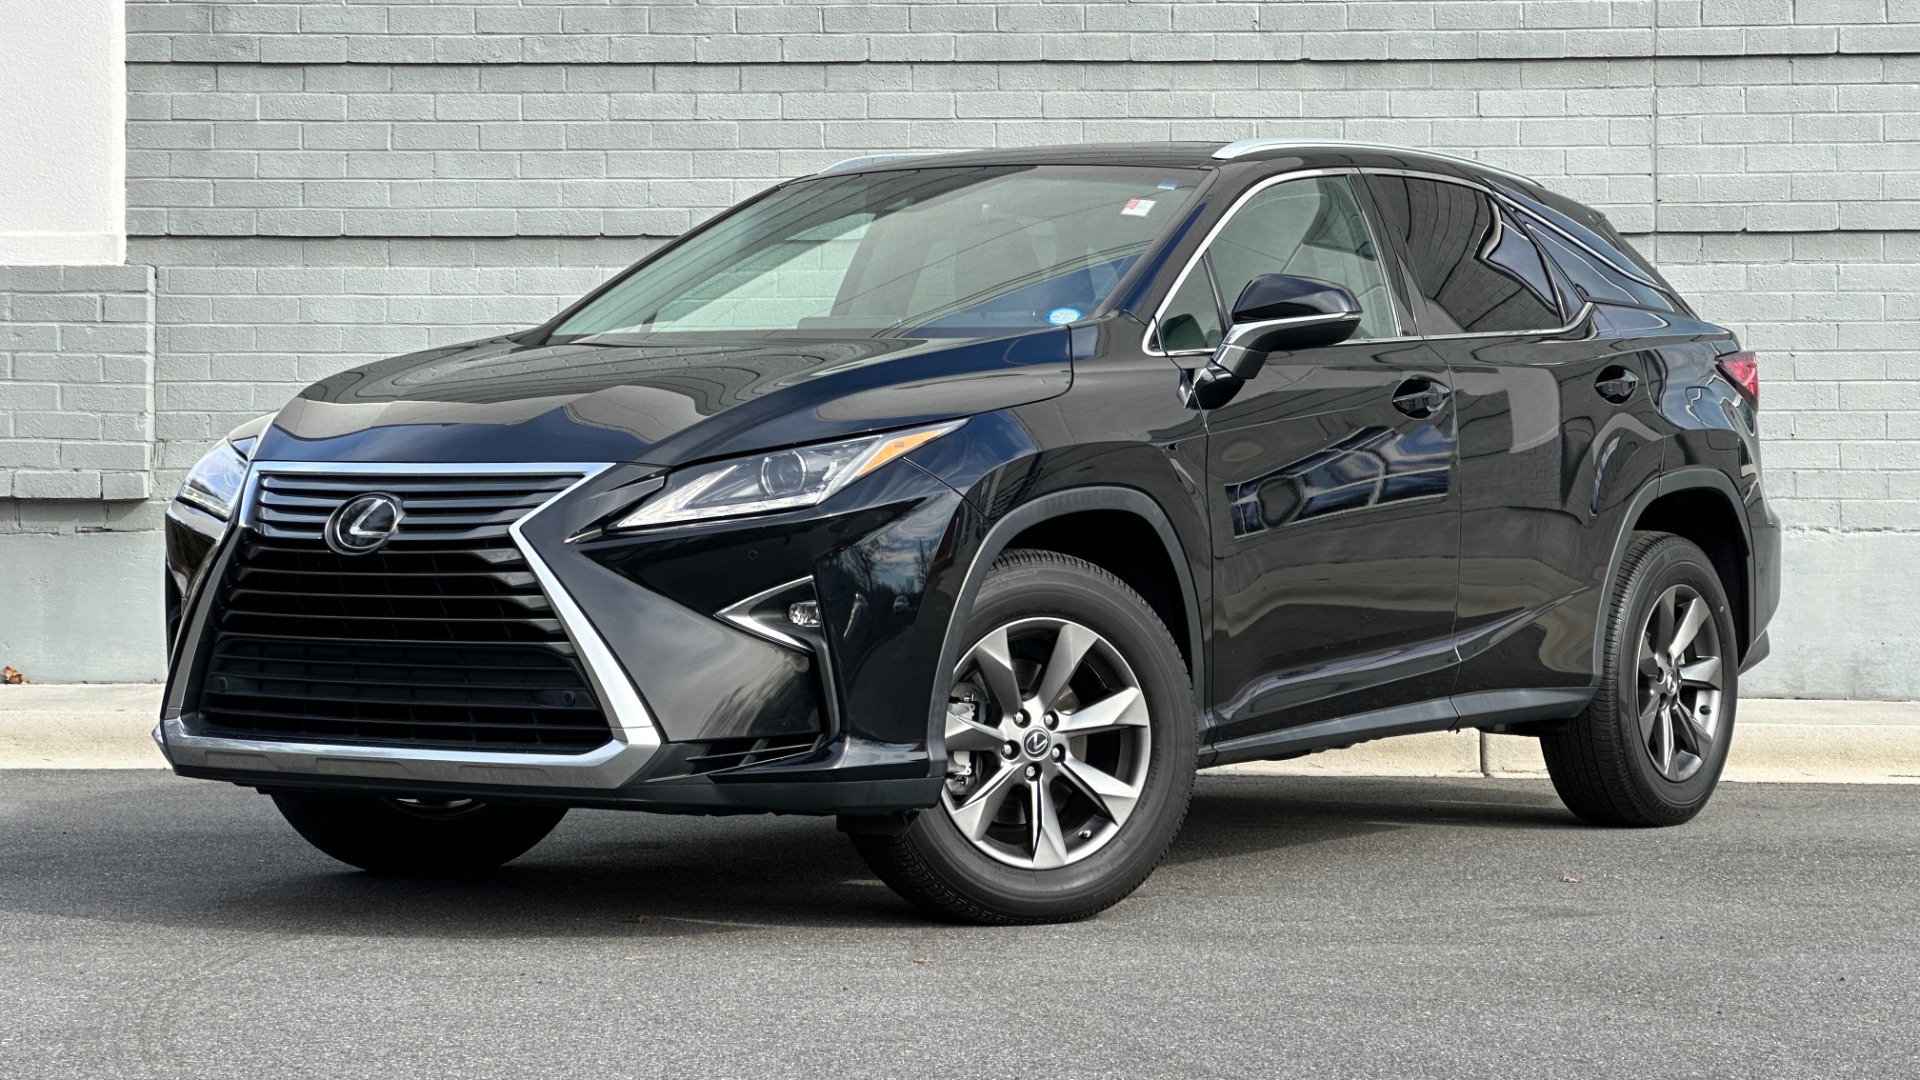 Used 2018 Lexus RX 350 3.5L V6 / PREMIUM / BLIND SPOT MONITOR / VENT STS / REARVIEW for sale $46,595 at Formula Imports in Charlotte NC 28227 1